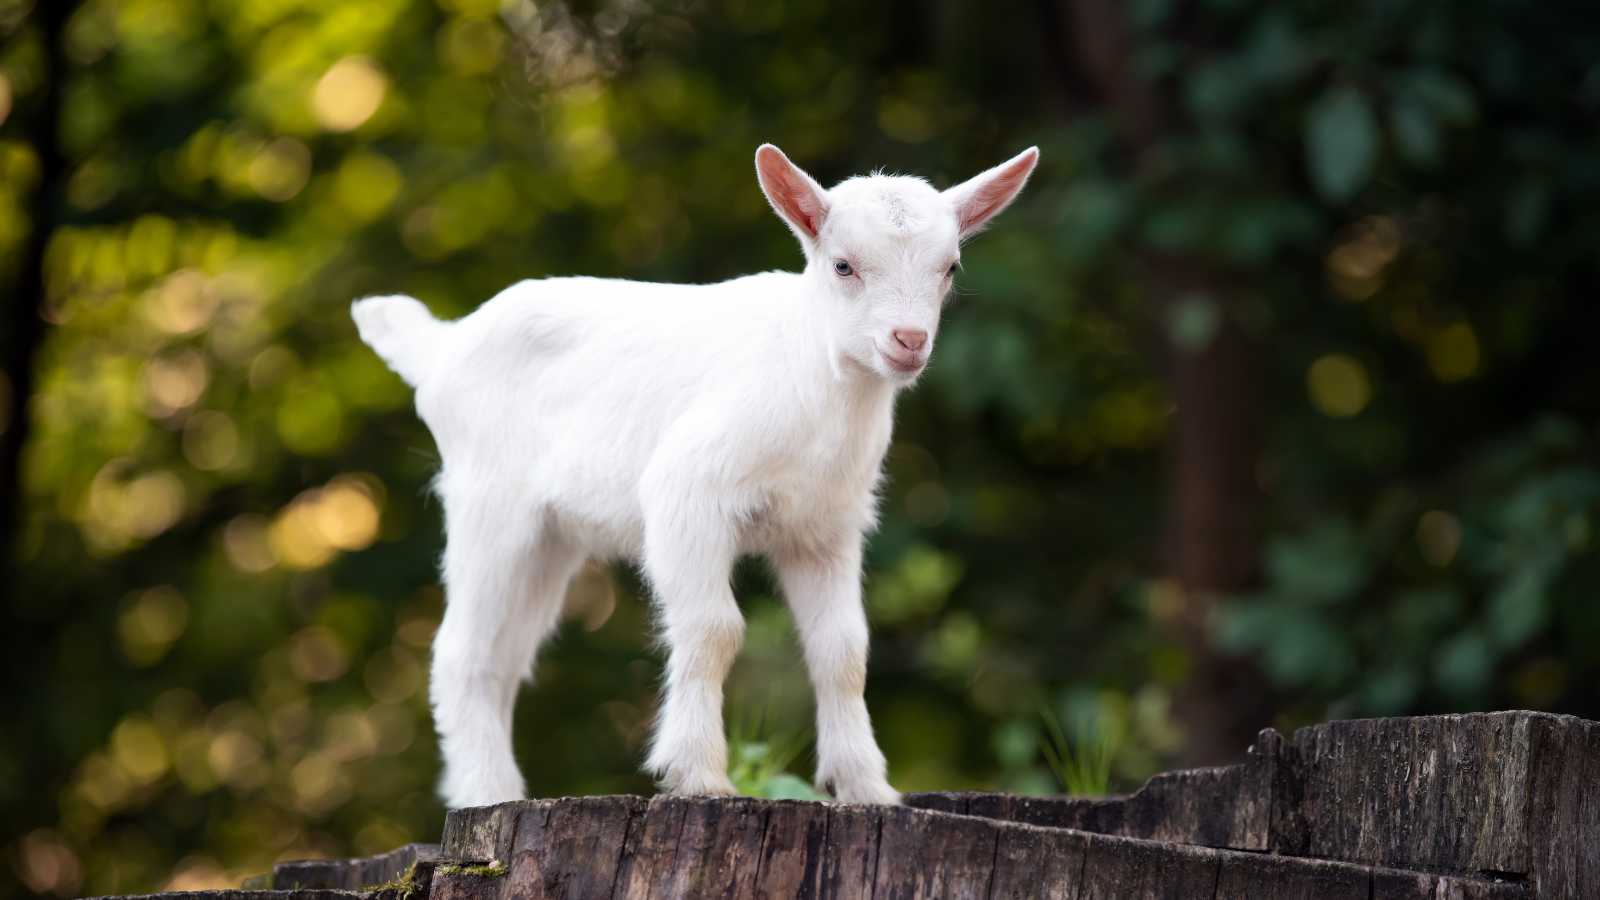 A very young, white baby goat stands on a tree stump.